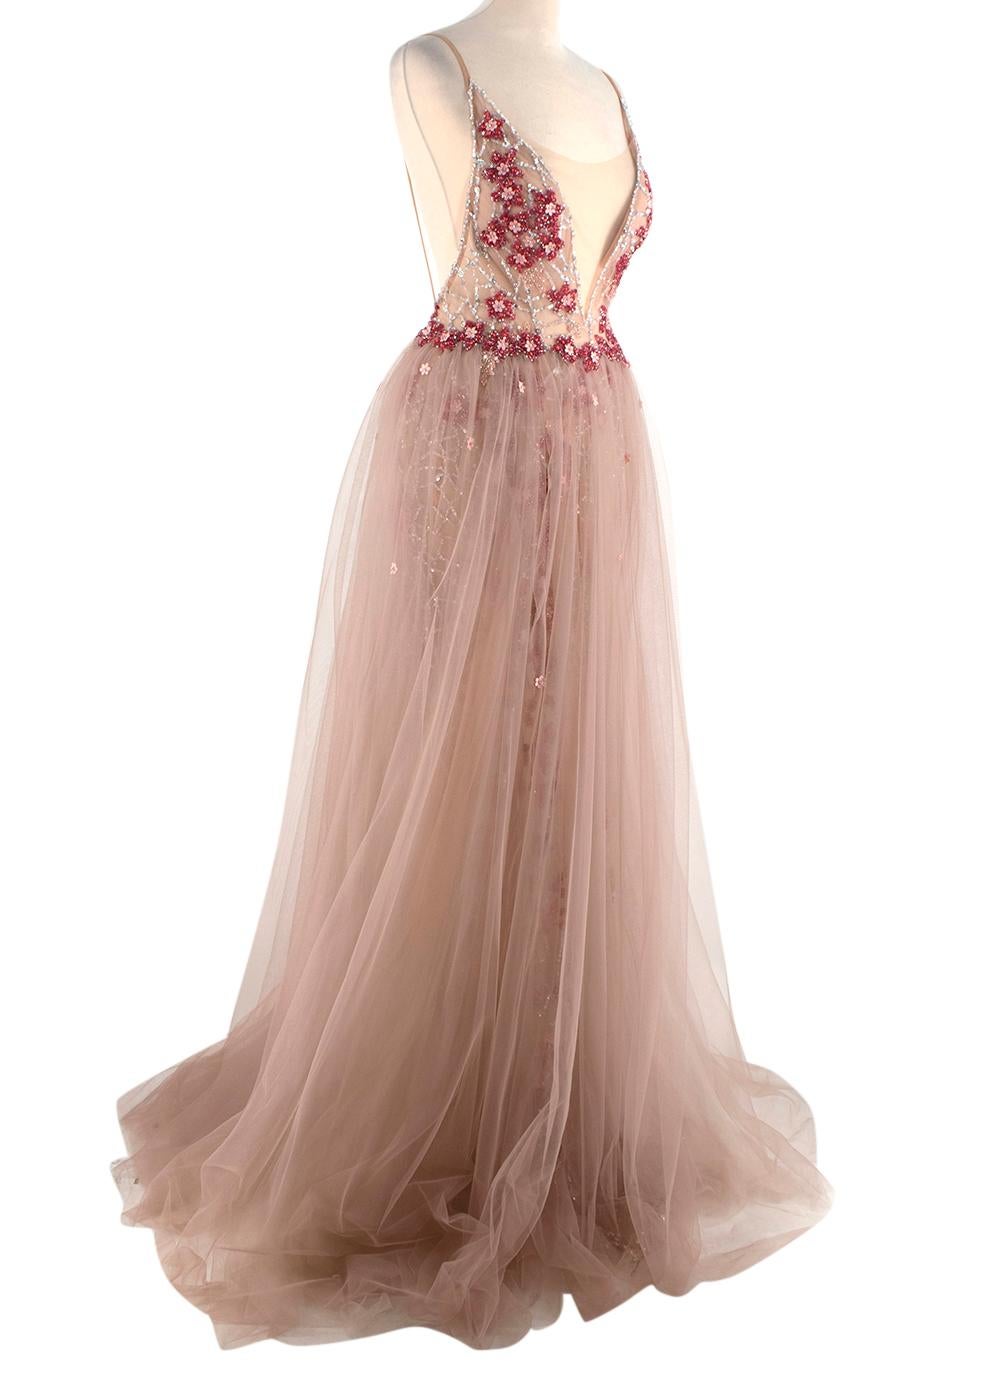 Berta Nude Tulle Plunge Neck Pink & Red Beaded Evening Gown

- Style 19-55 from FW19 Evening collection
- Illusion tulle column-style dress with deep, plunging v-neck
- Plunge neckline backed with illusion tulle for modesty and stability
-